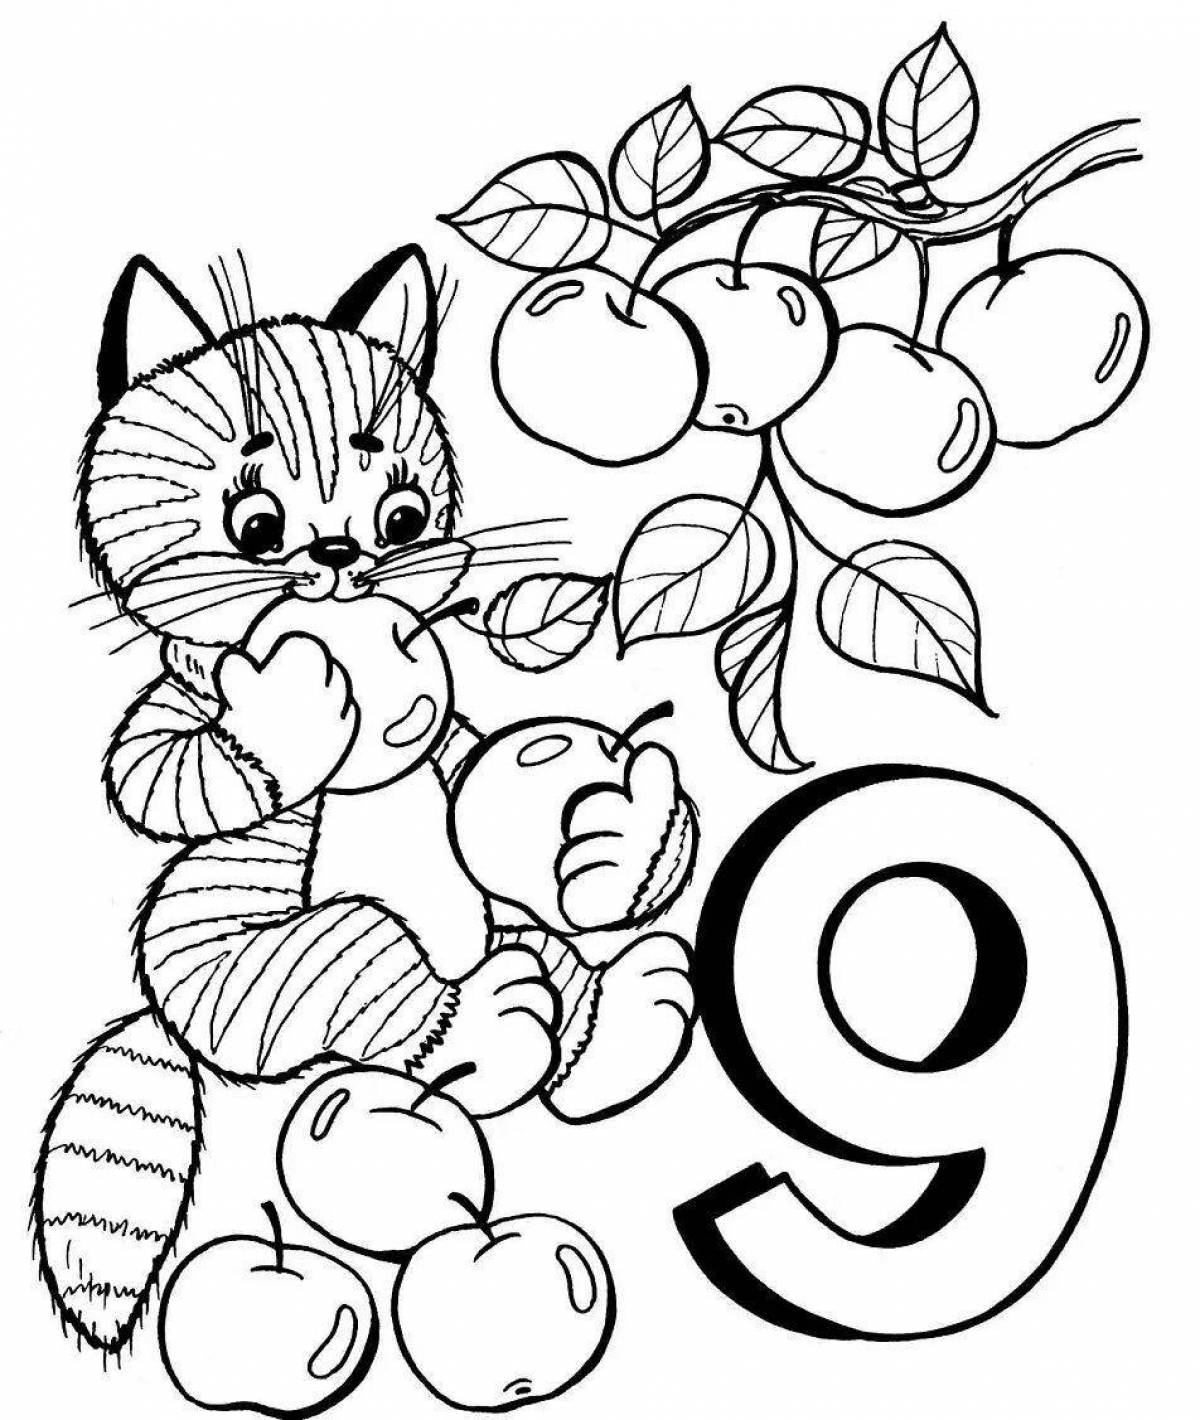 Color-bright coloring page for children 6-10 years old